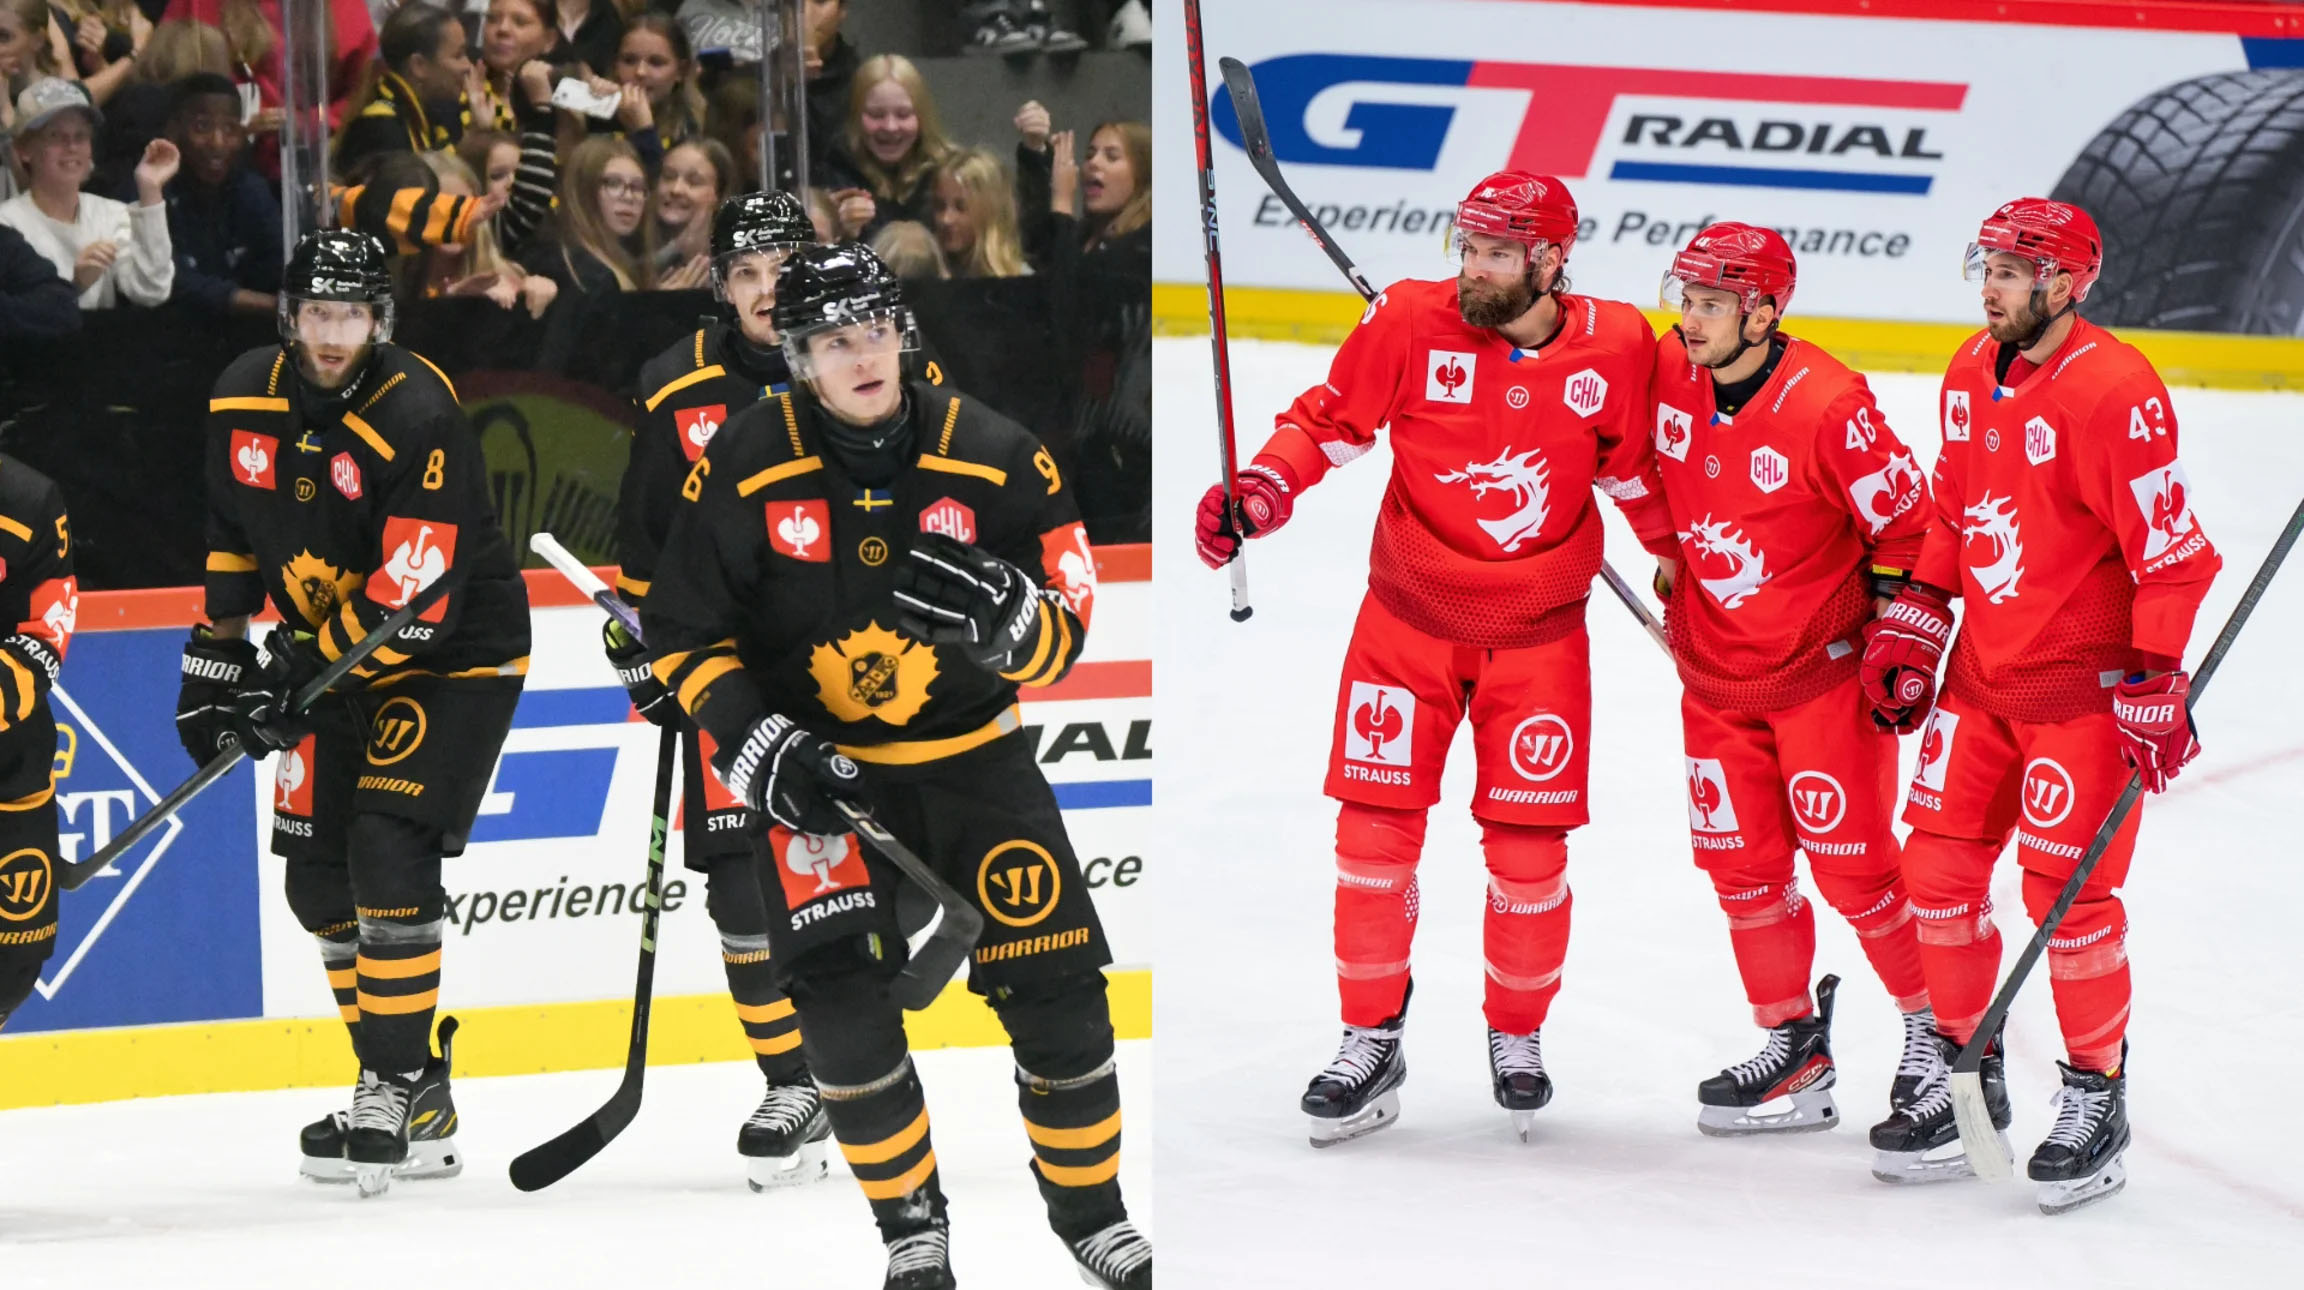 You are currently viewing Trzyniec vs Skelleftea